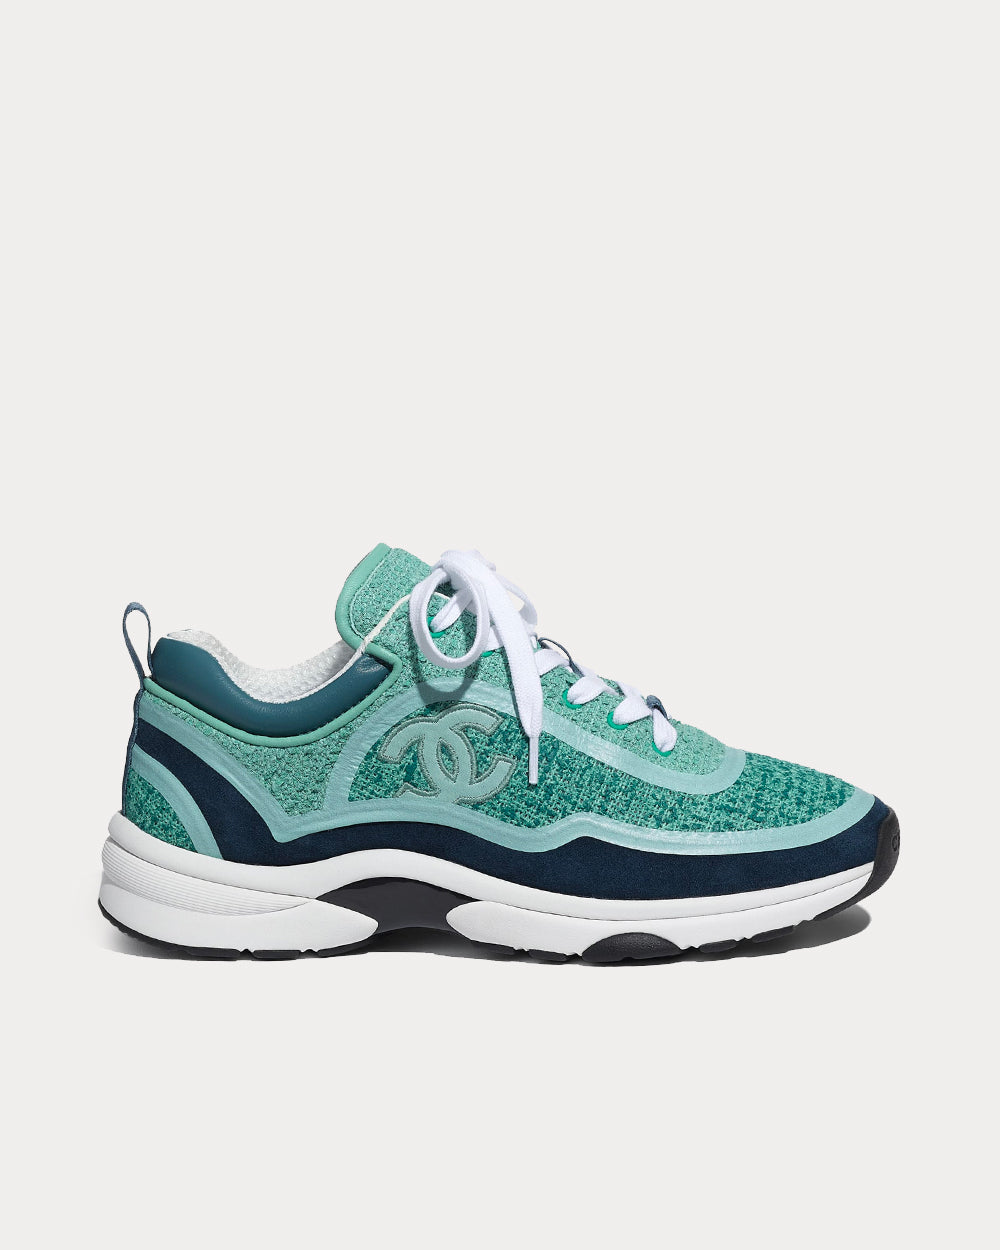 Chanel Sport Trail Sneakers a Sleeker Look  Spotted Fashion